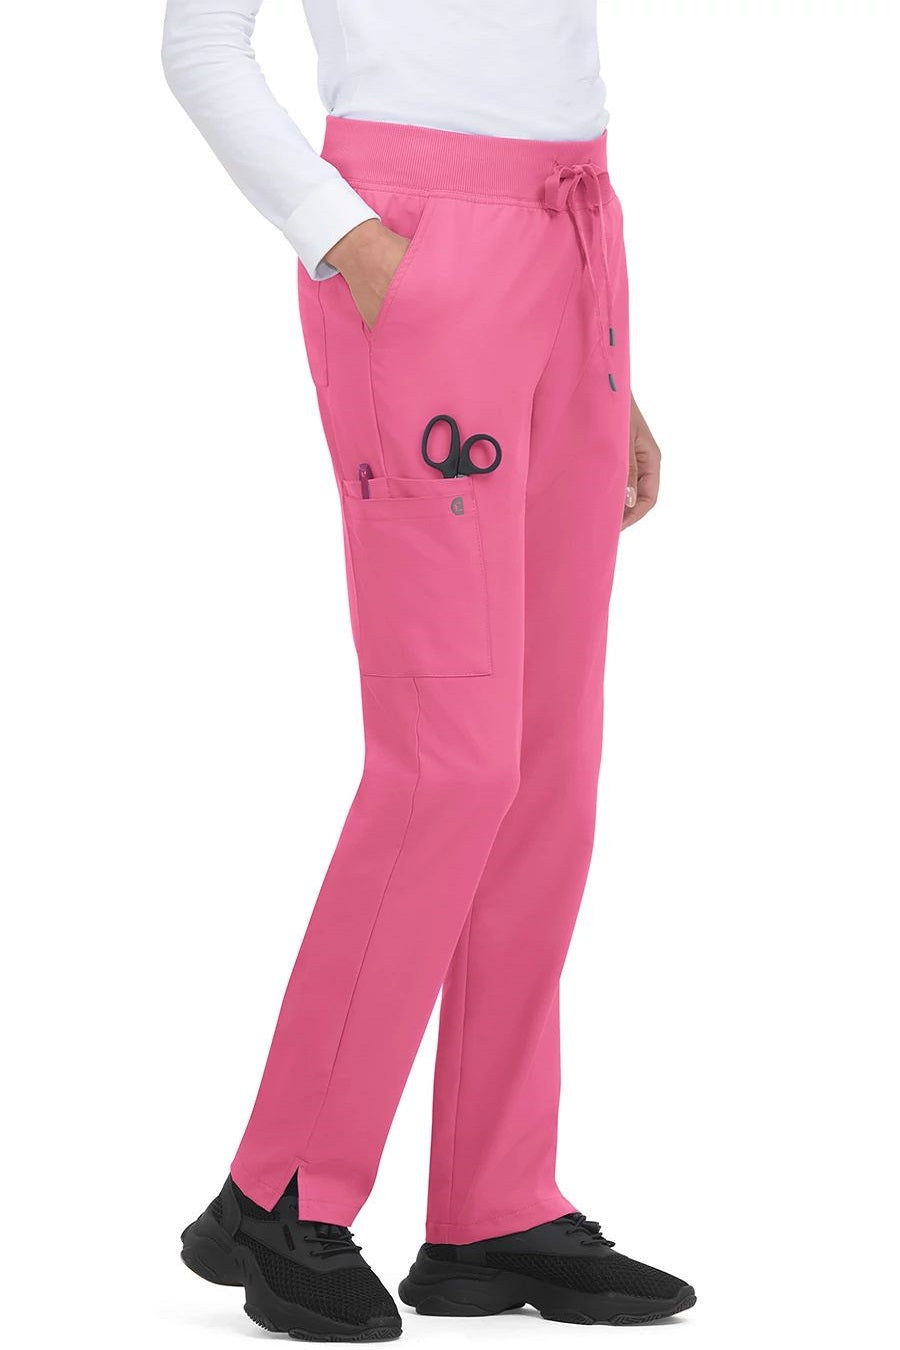 koi Scrub Pants Cureology Atria in Tall Carnation at Parker's Clothing and Shoes.